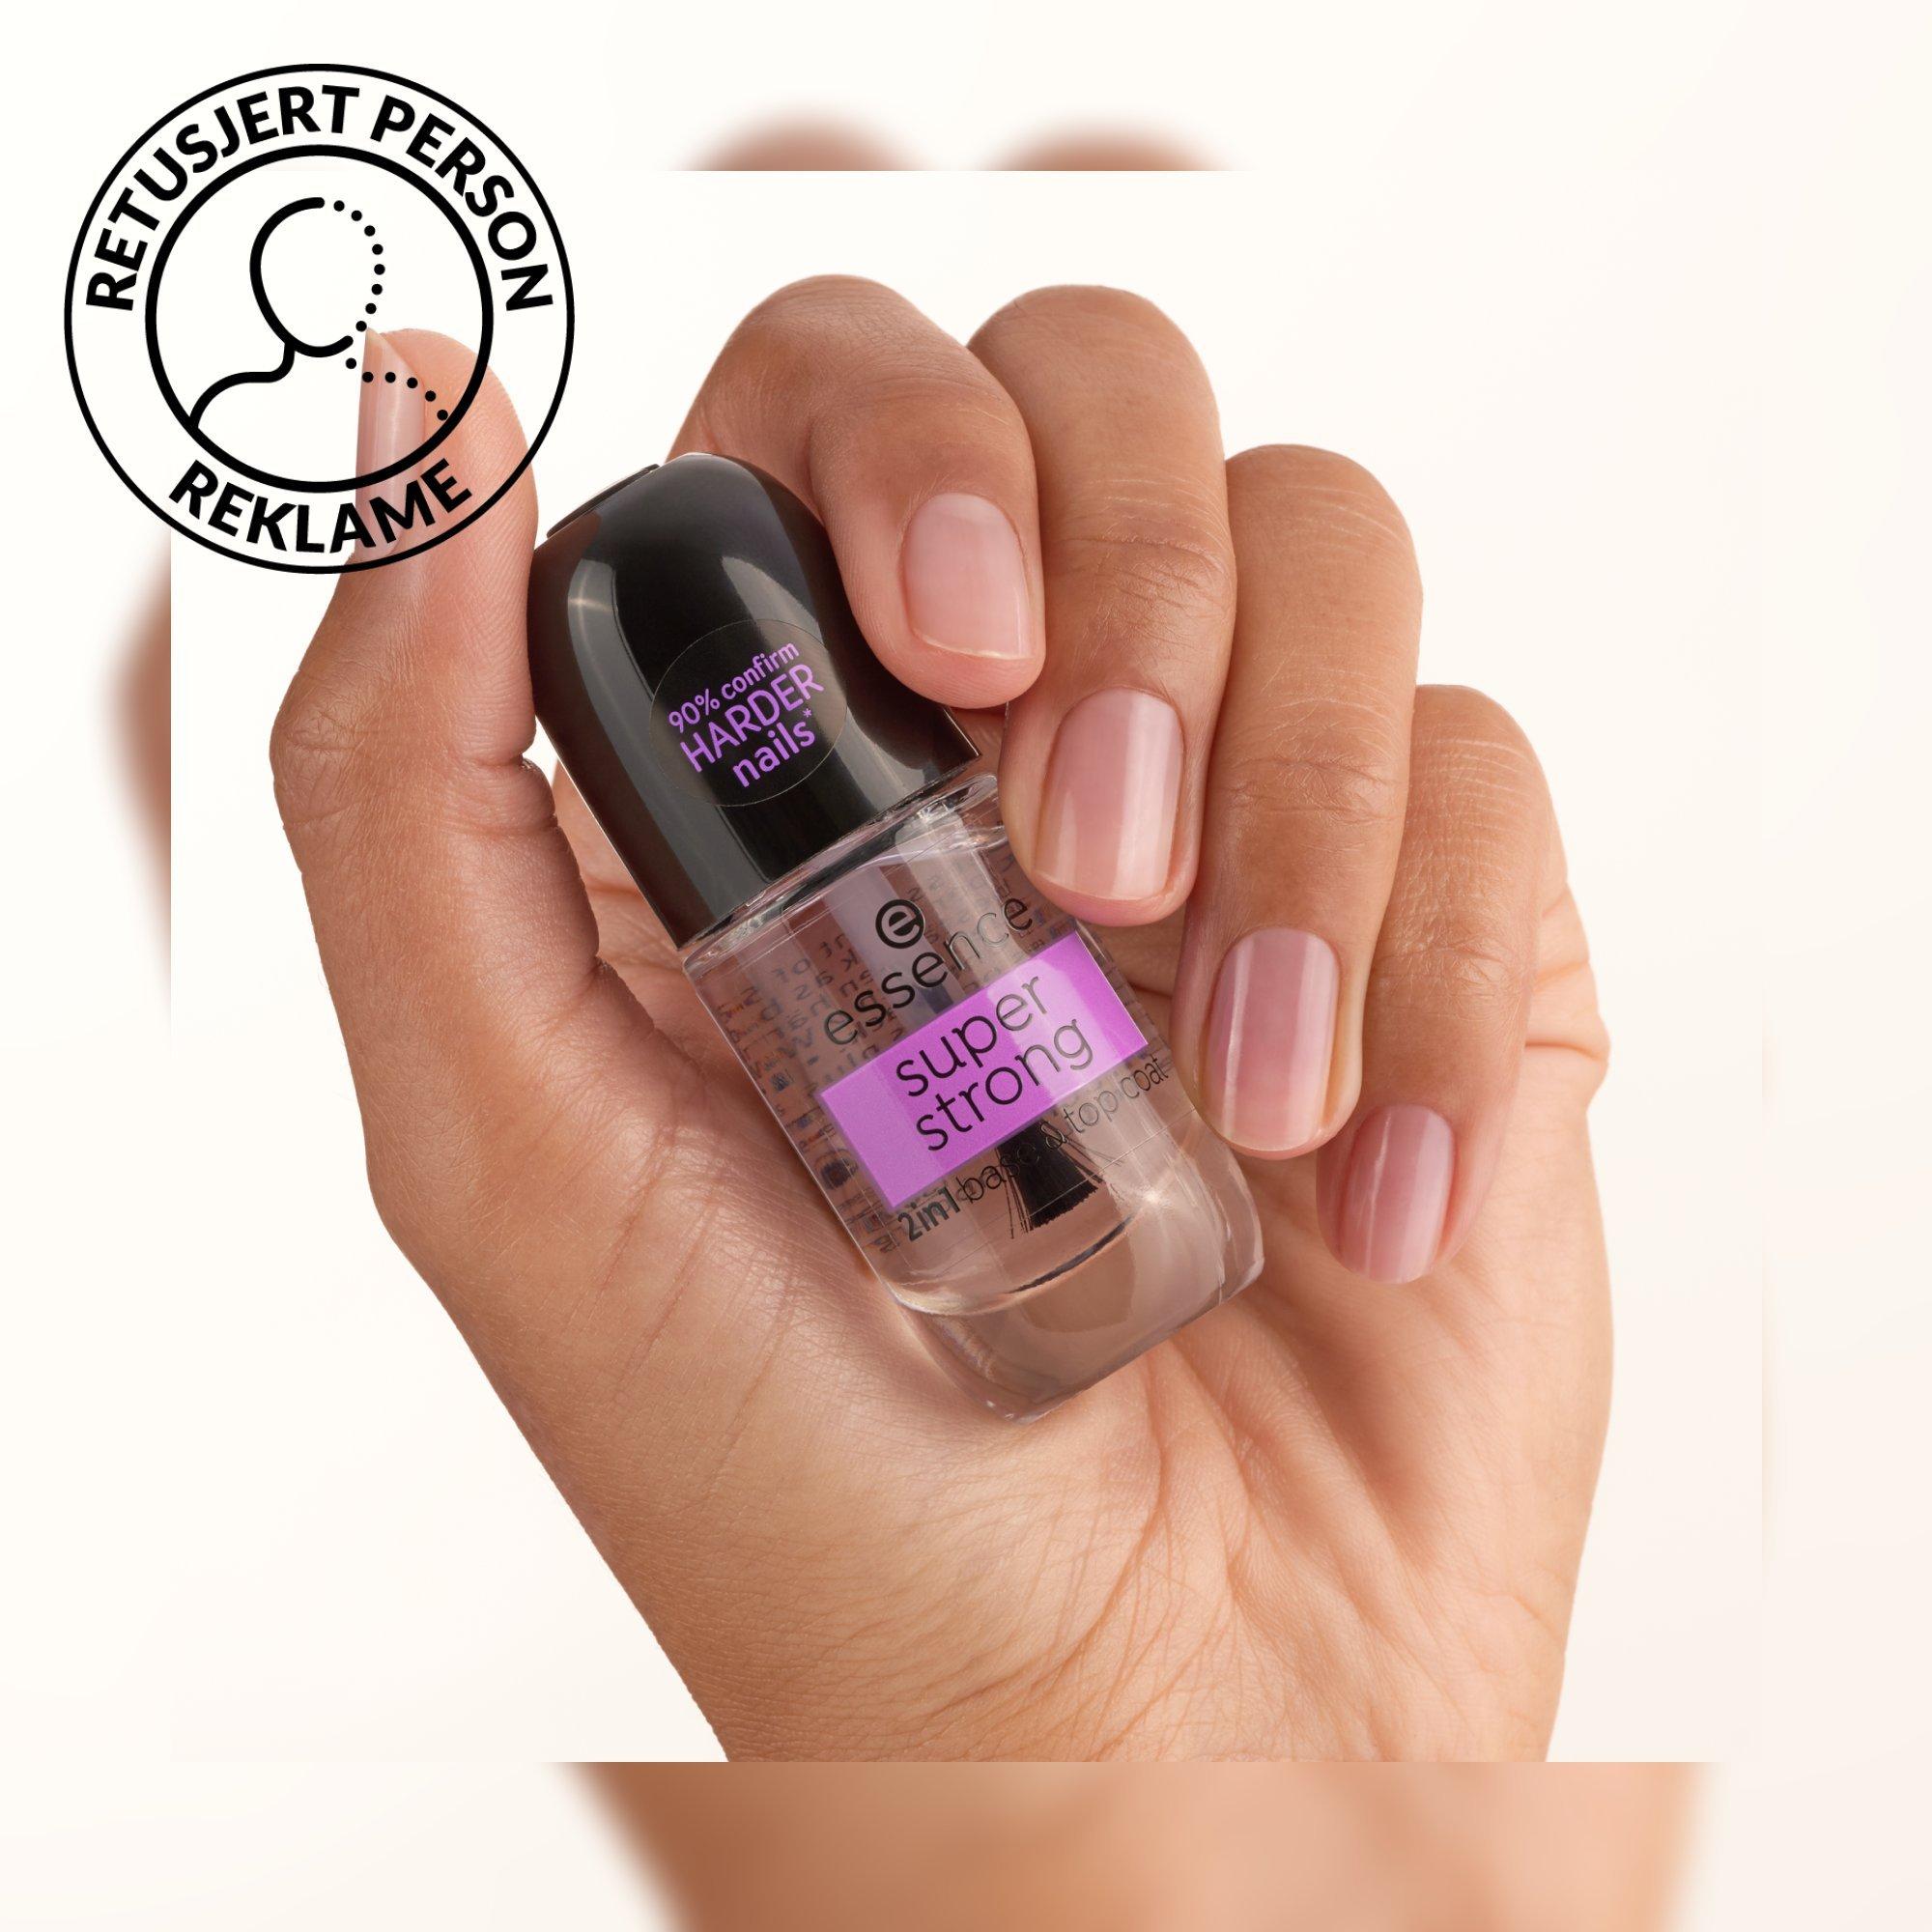 super strong 2in1 base & top coat